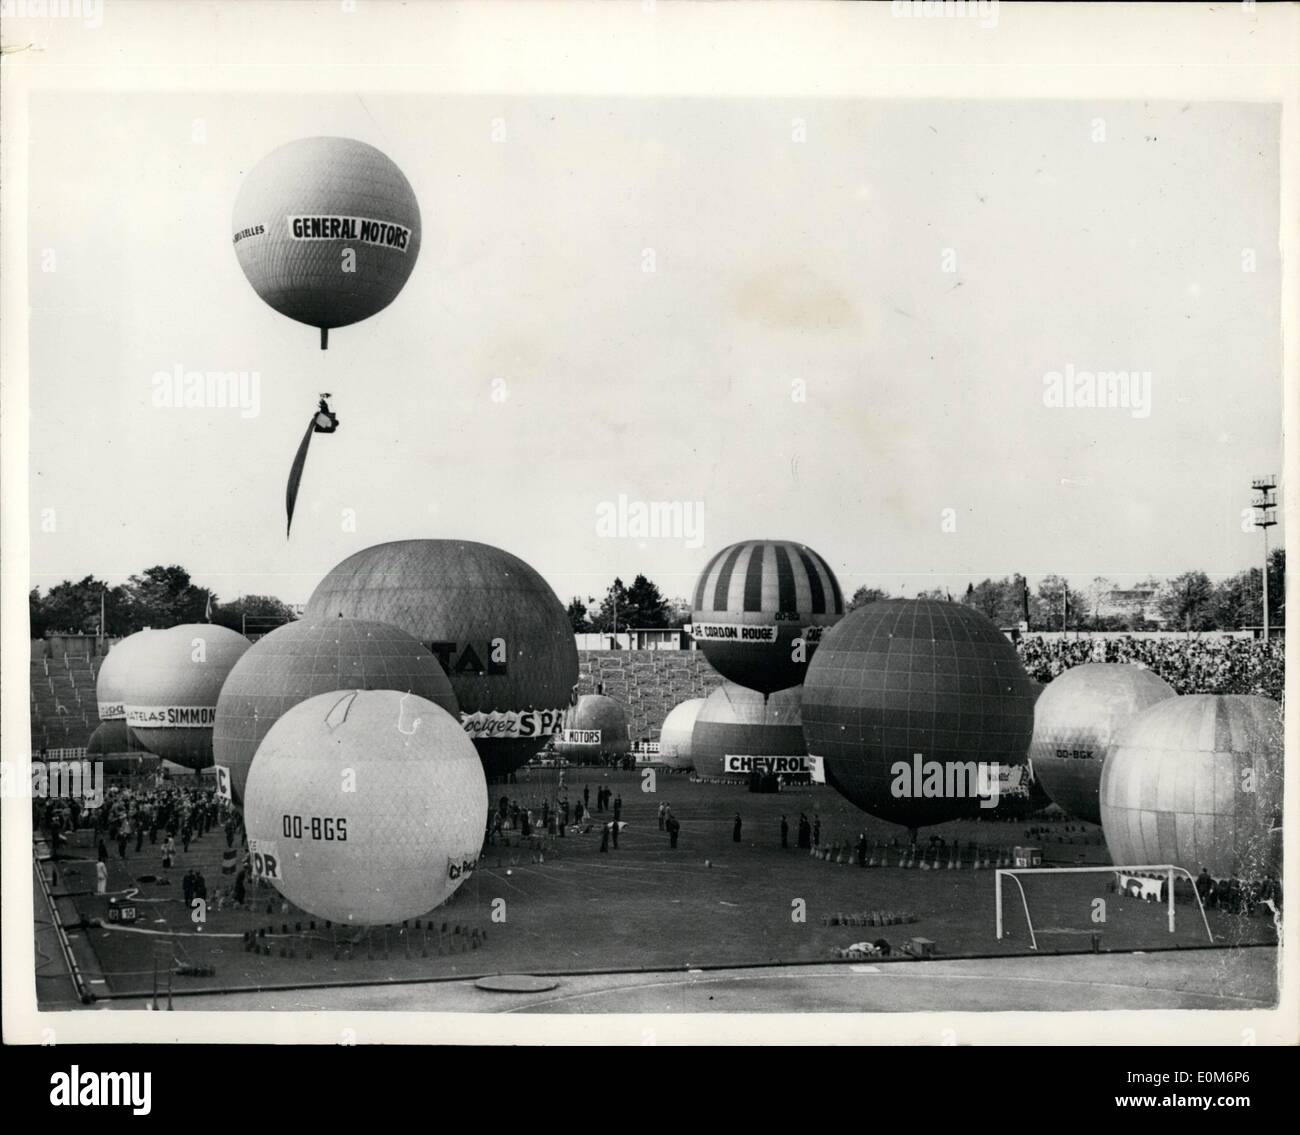 Sep. 09, 1953 - International Balloon meeting in Brussels: Prince Albert of Liege attended the Guard meeting of Free Balloons, at the Heysel Stadium in Brussels. Balloons pictured by French, Dutch, German, Canadian and Belgium pilots, took part in the meeting. Photo shows view of the balloons assembled at the Heysel Stadium in Brussels, showing the first to take off ascending. Stock Photo